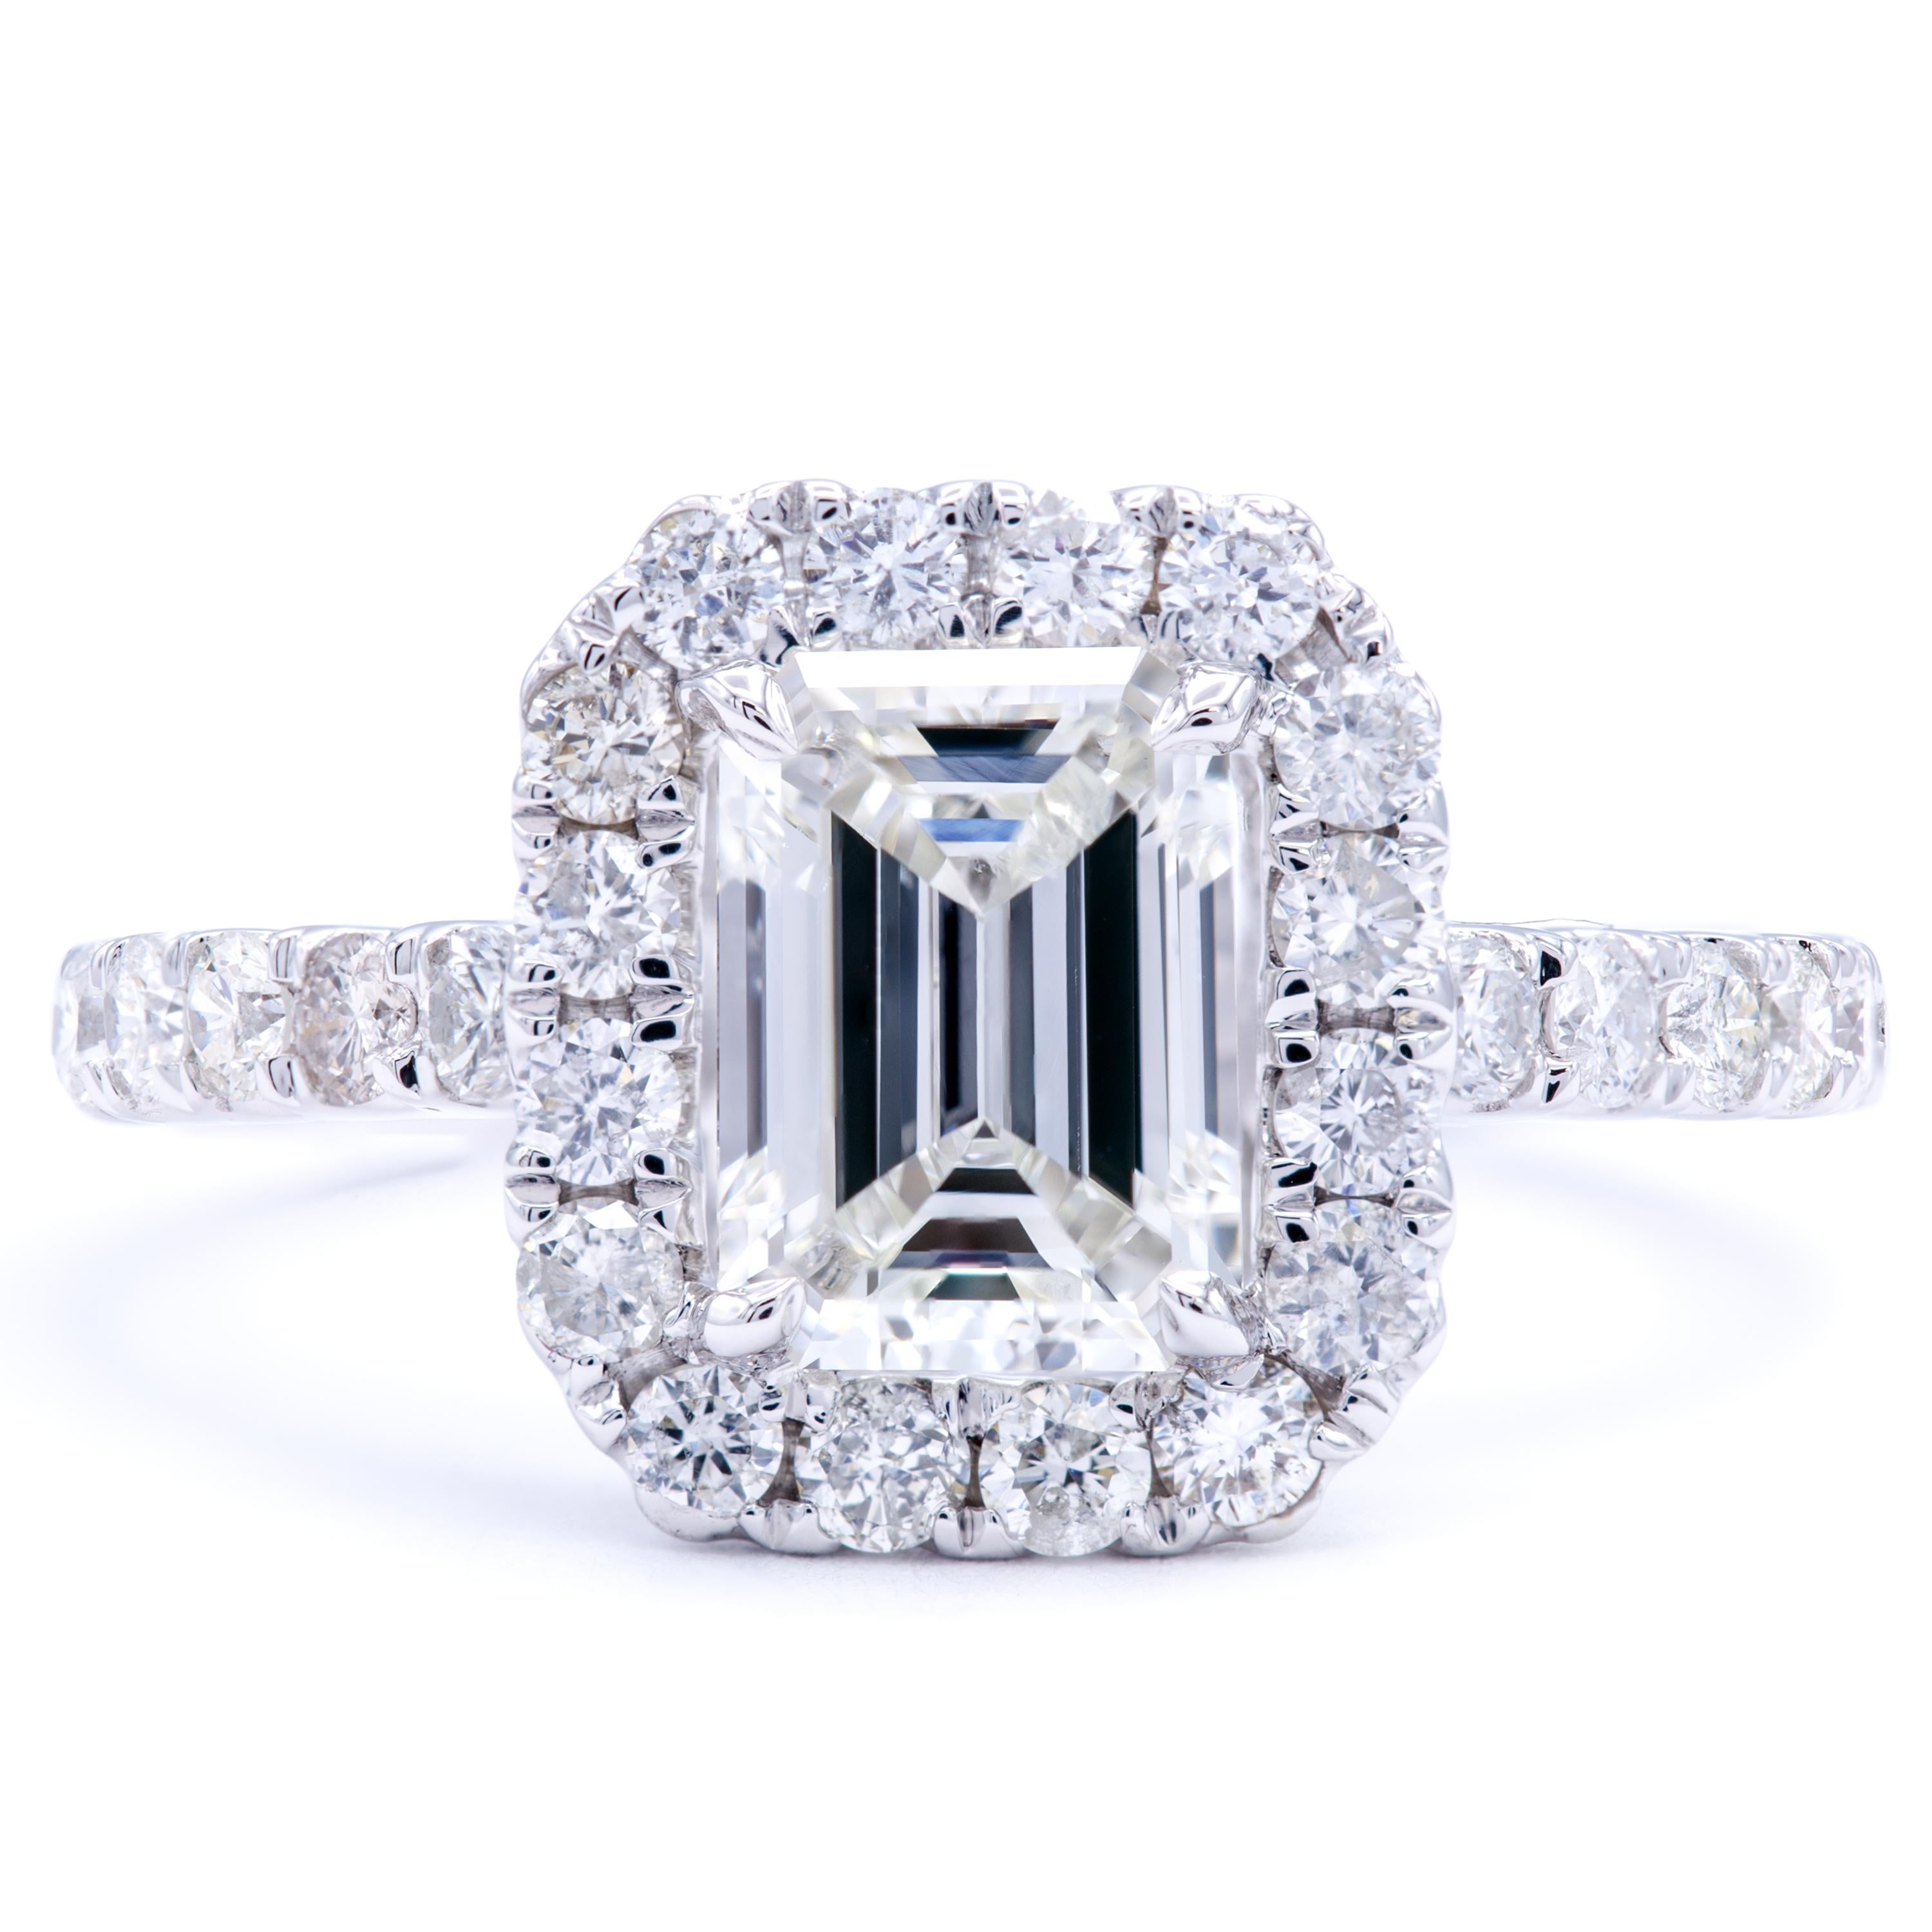 Bold in character and beautiful in rarity. This beautiful Rosenberg Diamonds & Co. engagement ring features a stunning GIA certified 1.21 carat emerald cut diamond embraced by round brilliant accents all across the band of 18Kt white gold. Designed